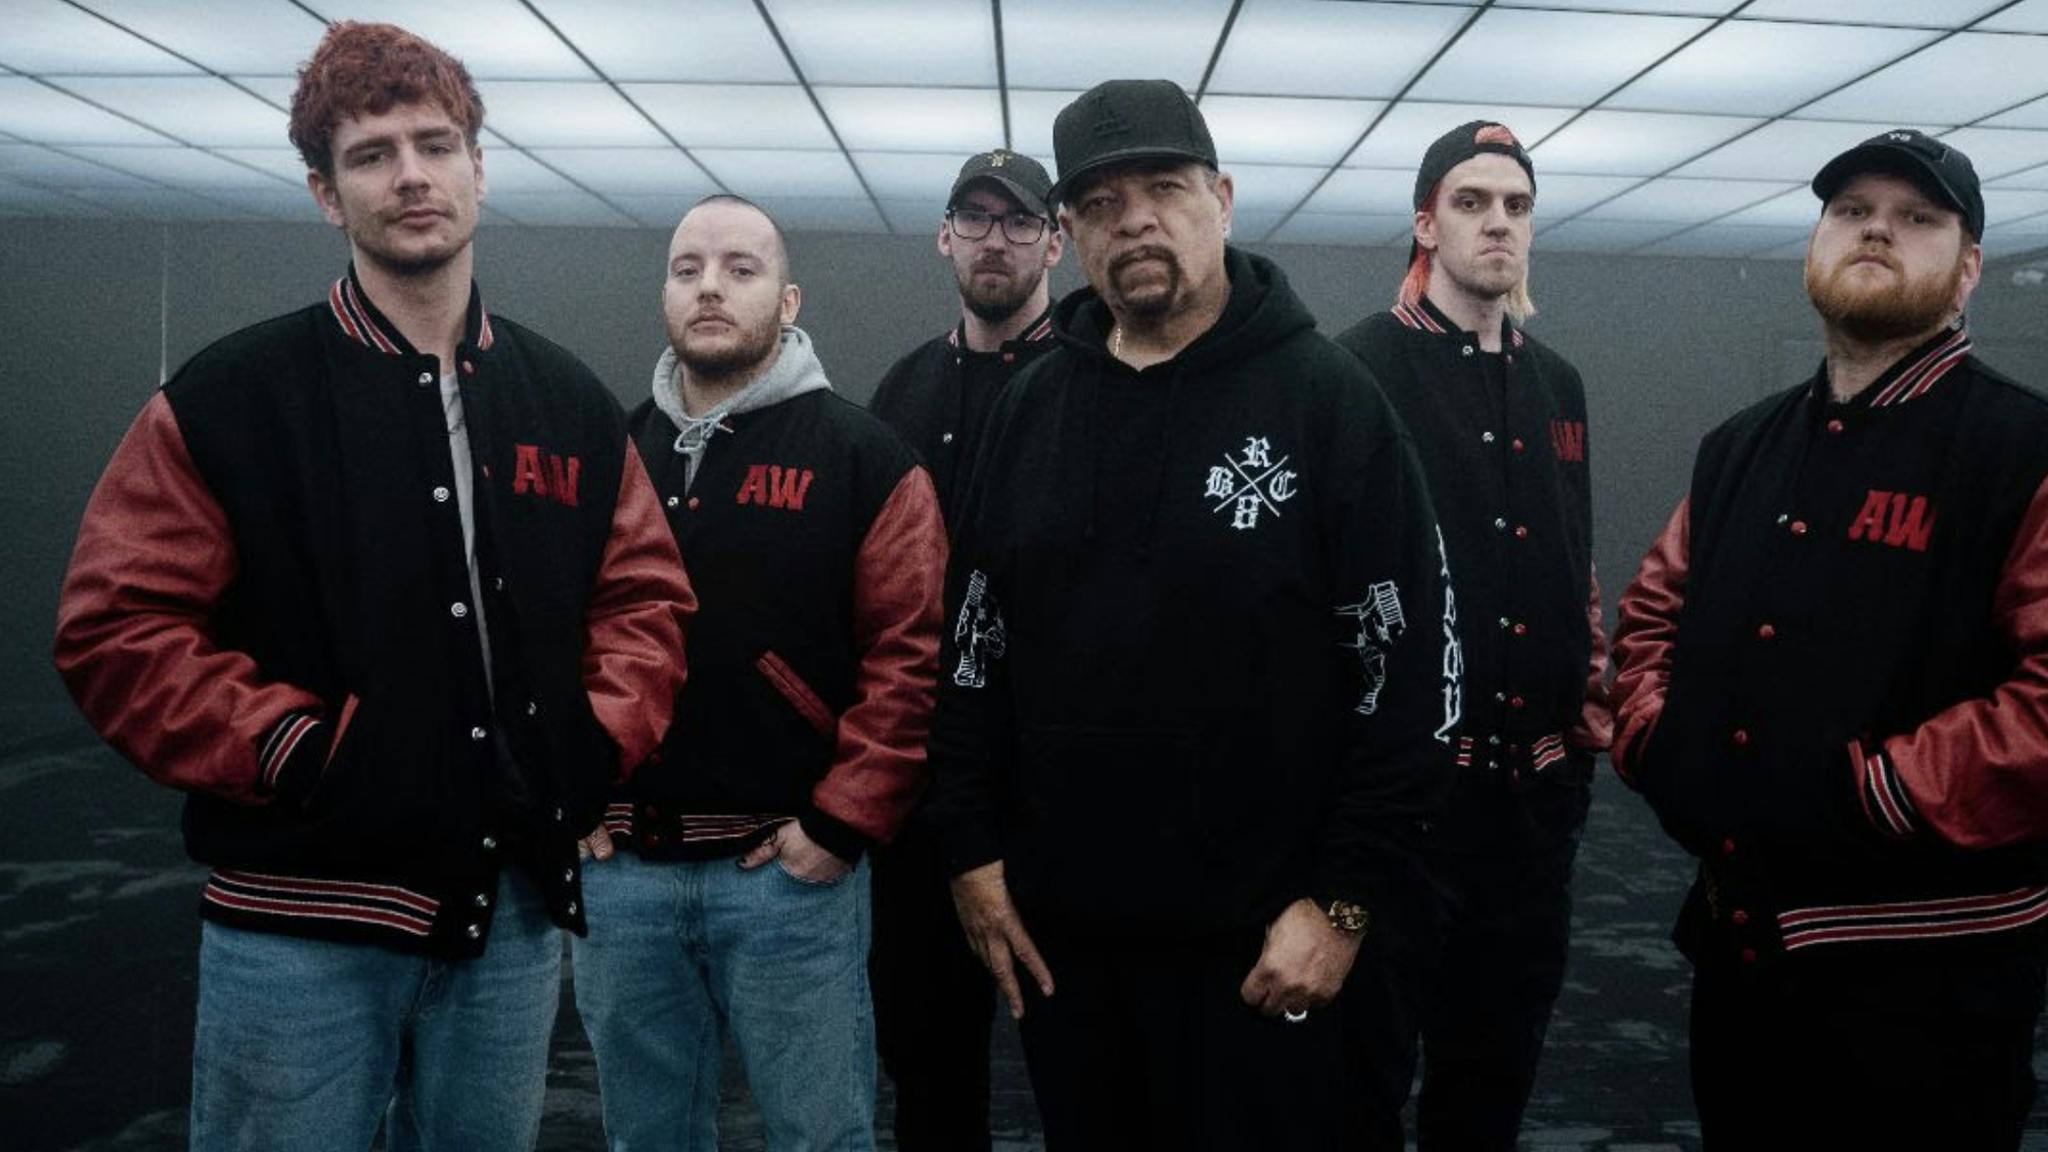 Alpha Wolf “decided to shoot for the stars”, and got Ice-T on their new single